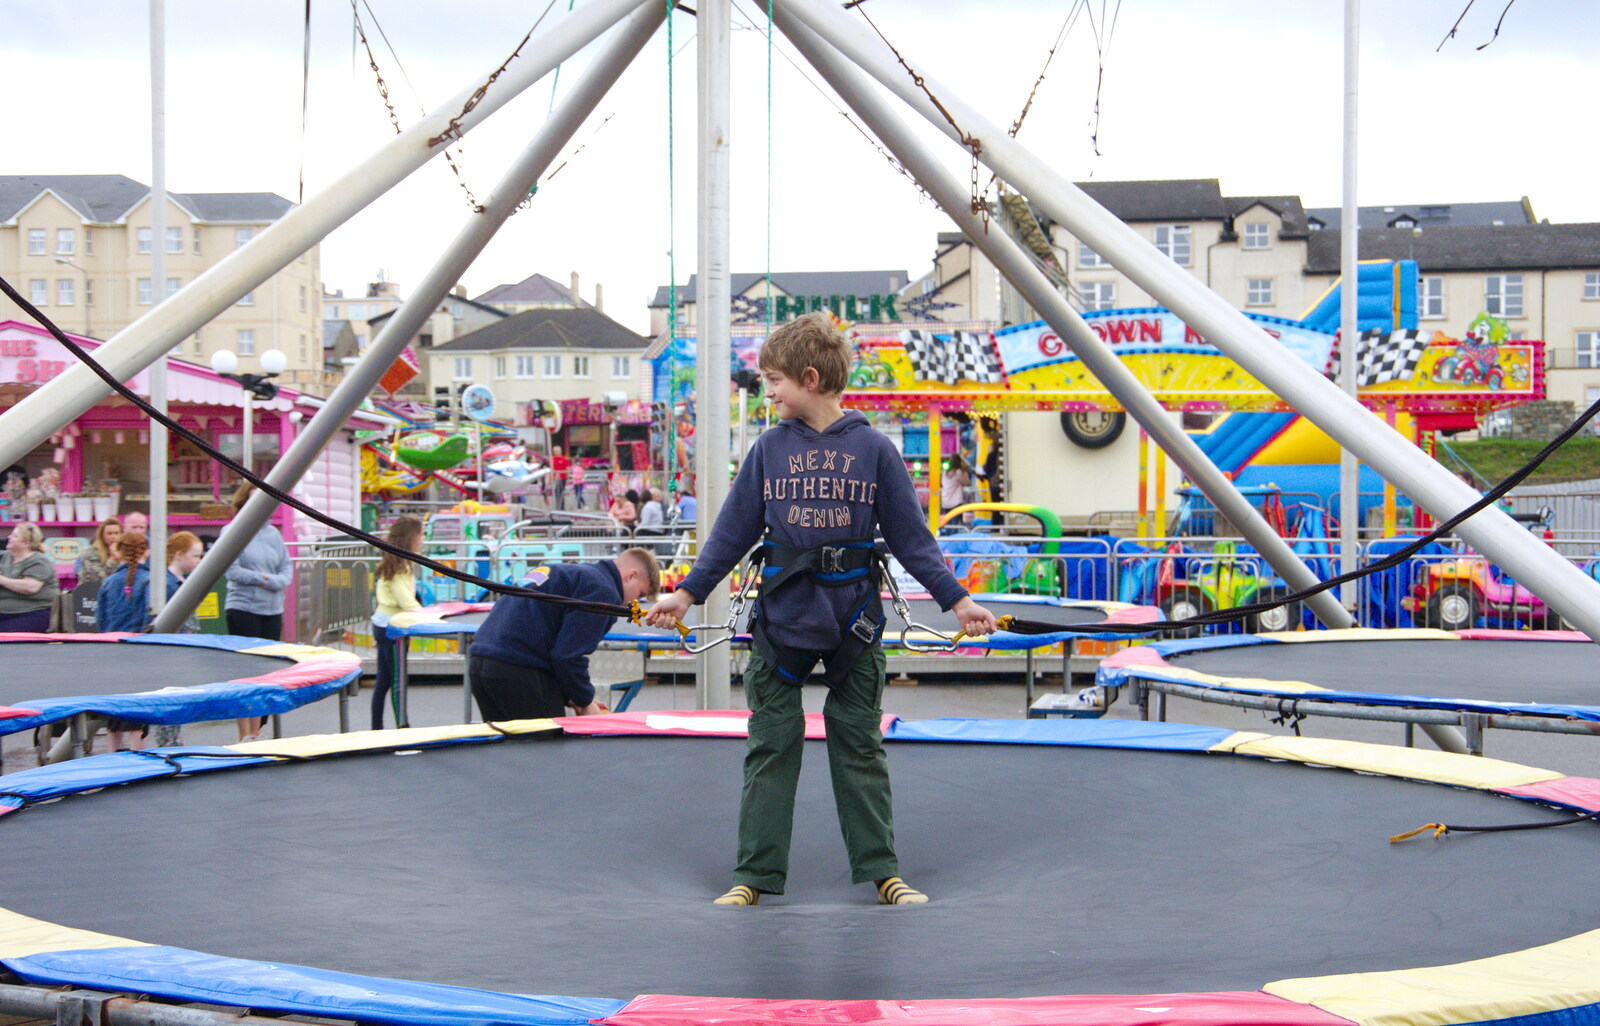 Fred gets ready for a bounce from A Day in Derry, County Londonderry, Northern Ireland - 15th August 2019